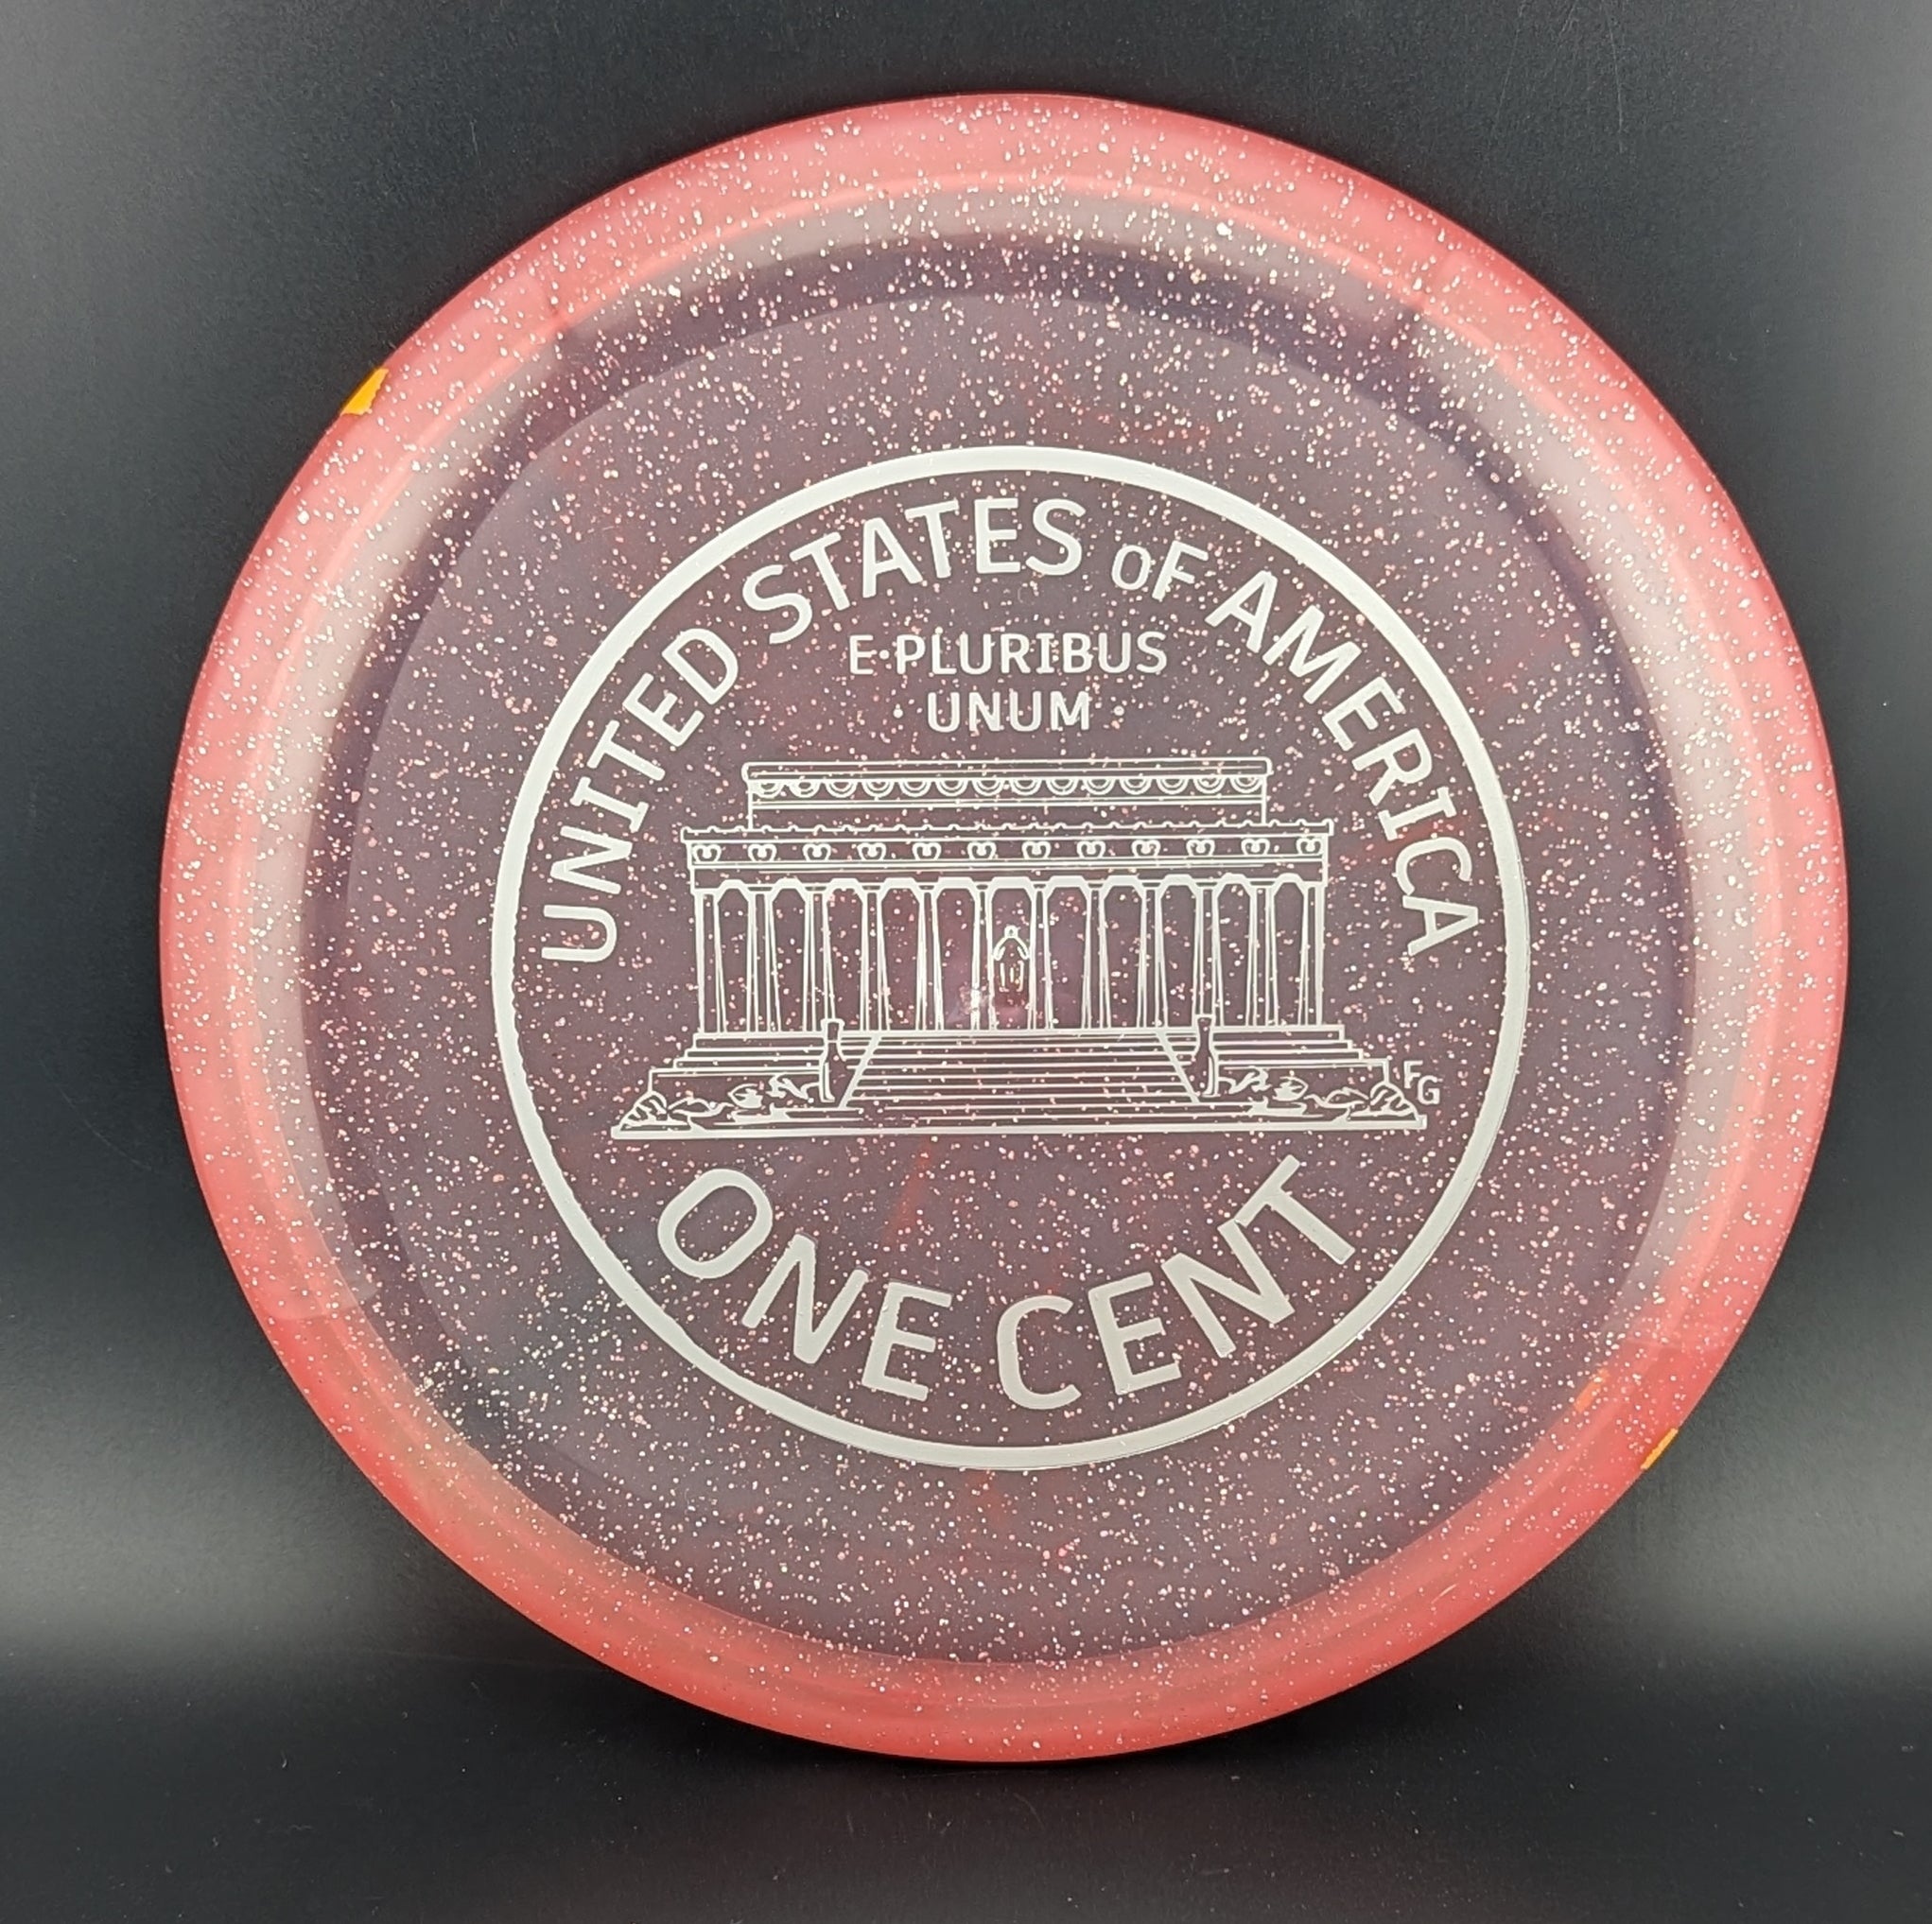 Lone Star Discs Founders Penny Putter